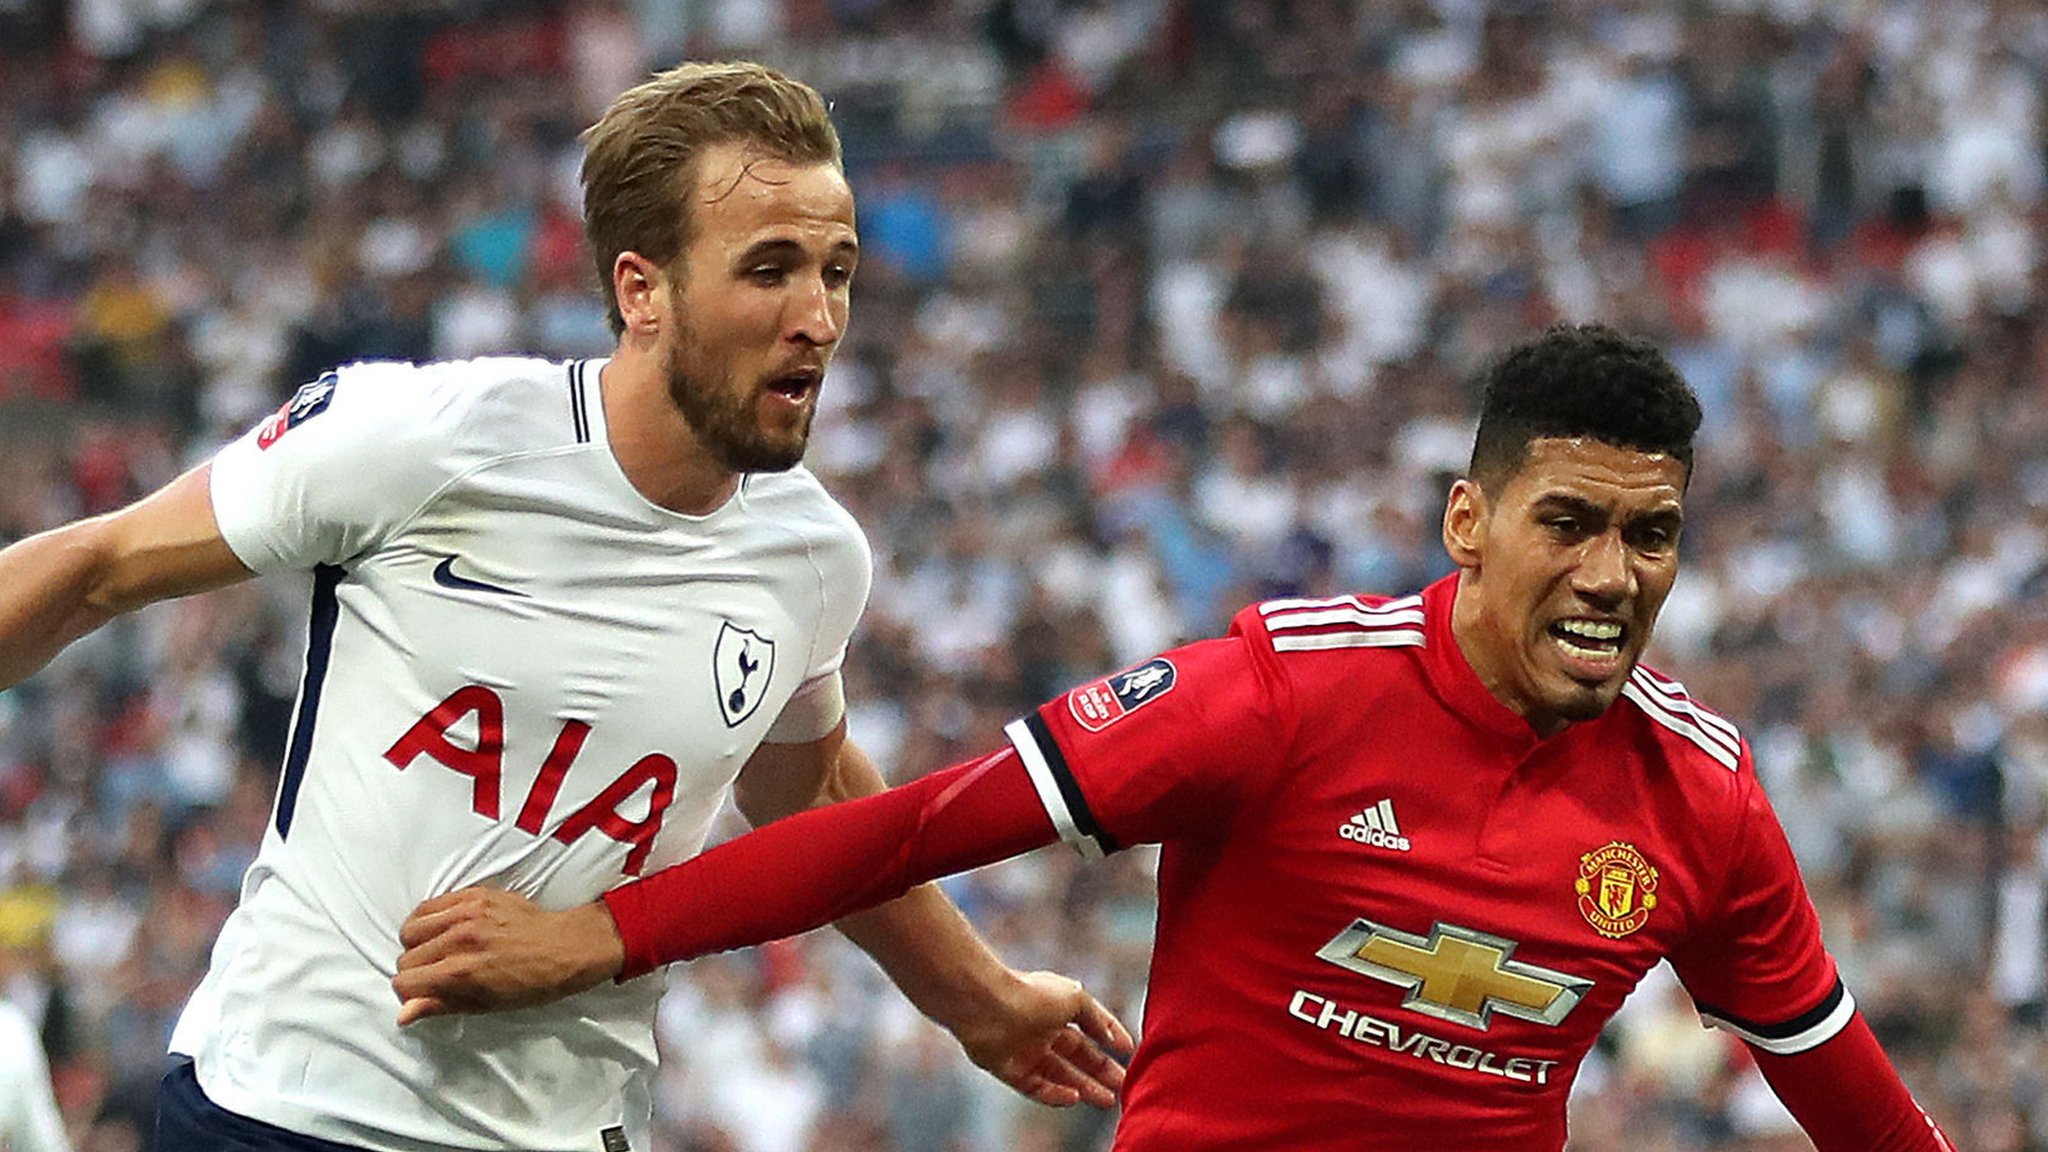 'What's in your pocket?' - FA apologises for Kane FA Cup tweet